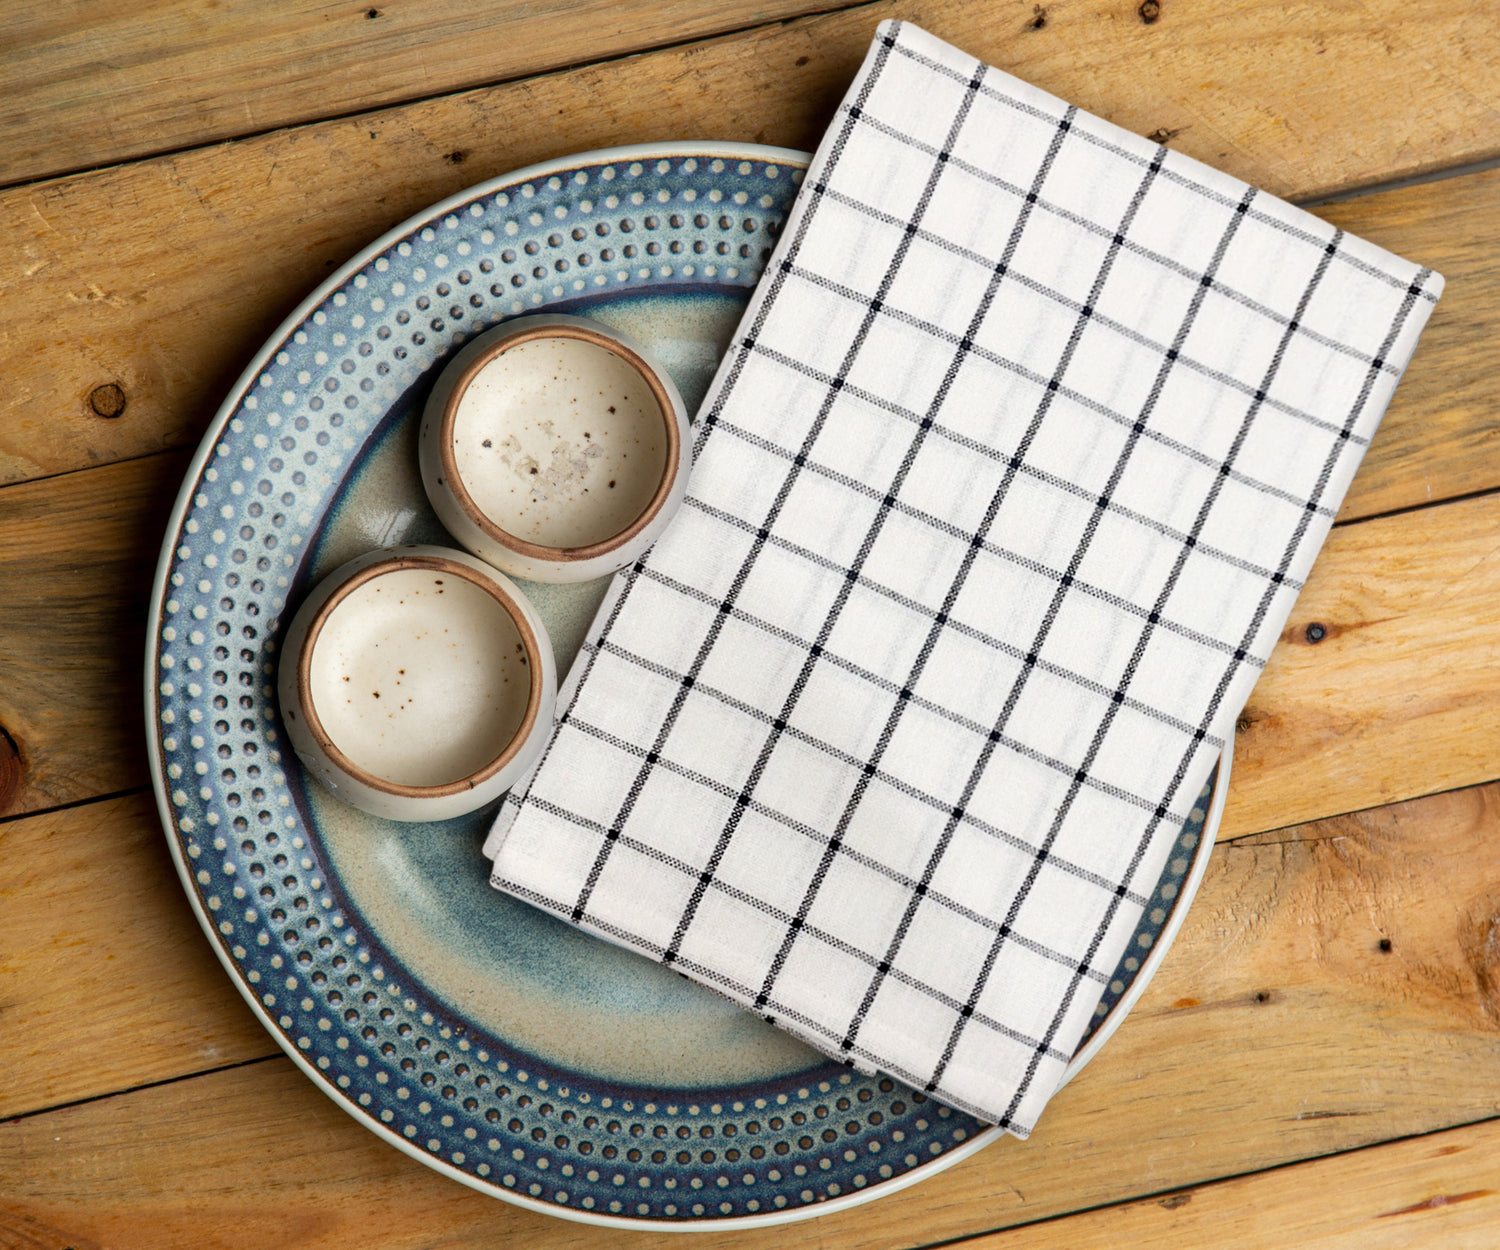 How can you make the most of cloth napkins? Here are some helpful tips to enhance your experience: